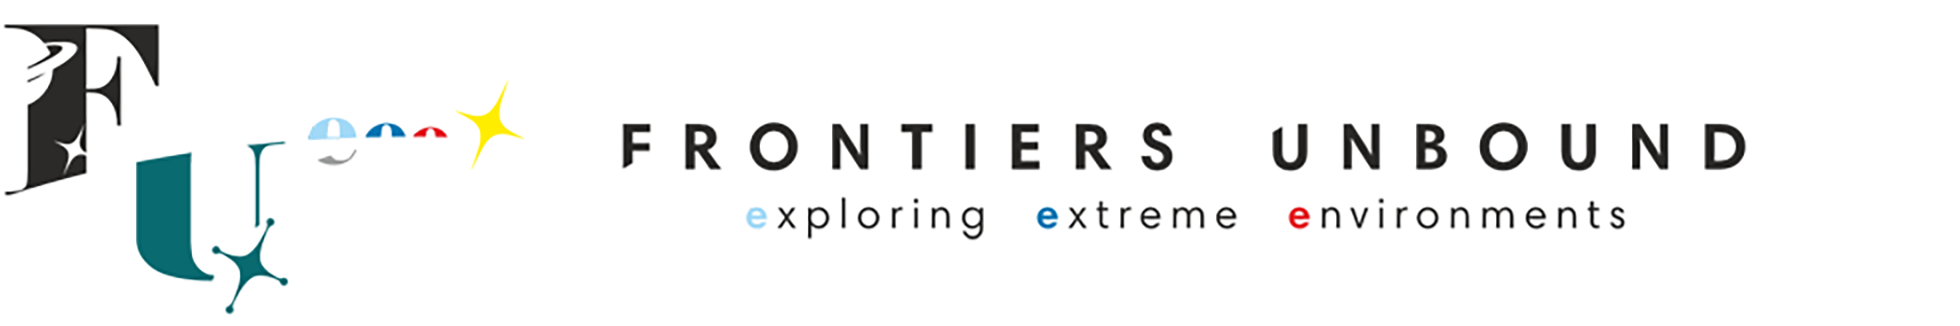 FRONTIERS UNBOUND: Exploring Extreme Environments